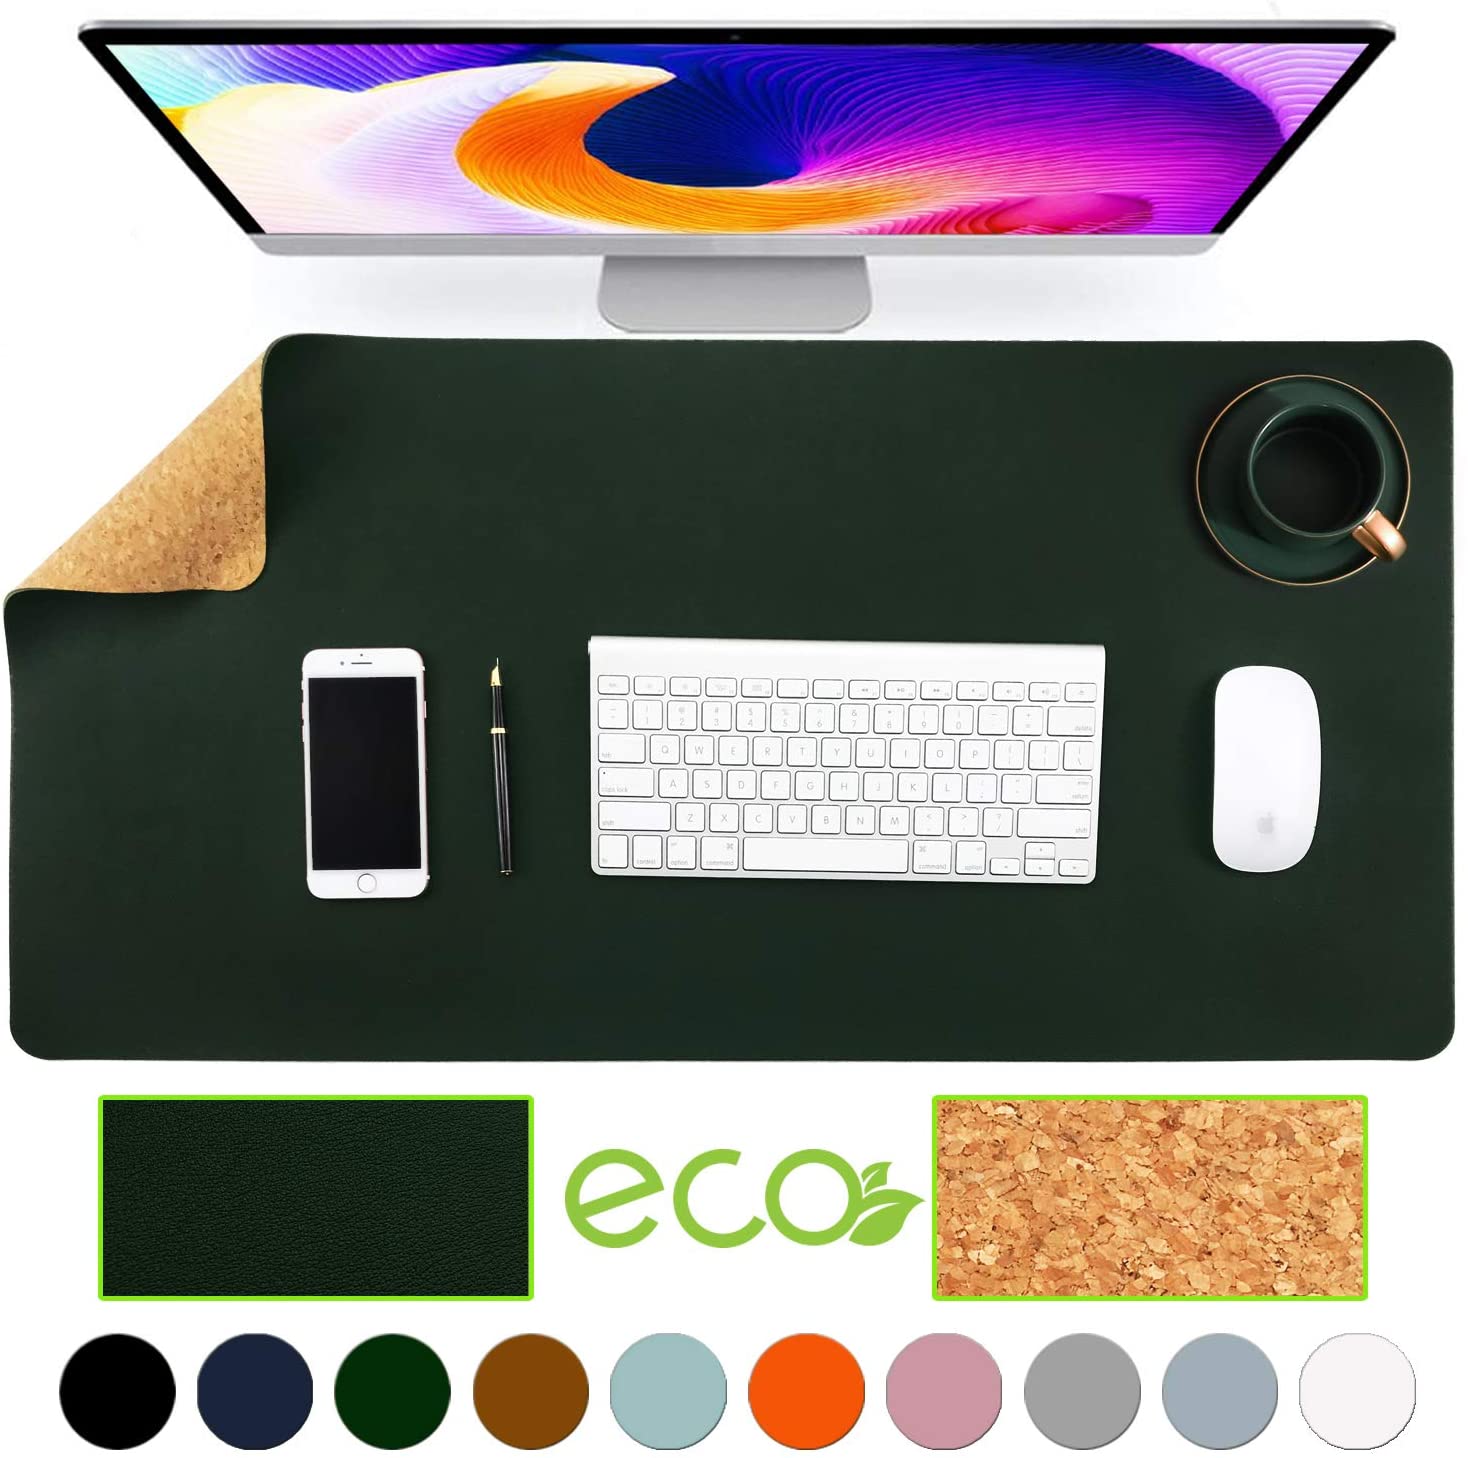 Aothia  Eco-friendly Desk Accessories for Your Workspace